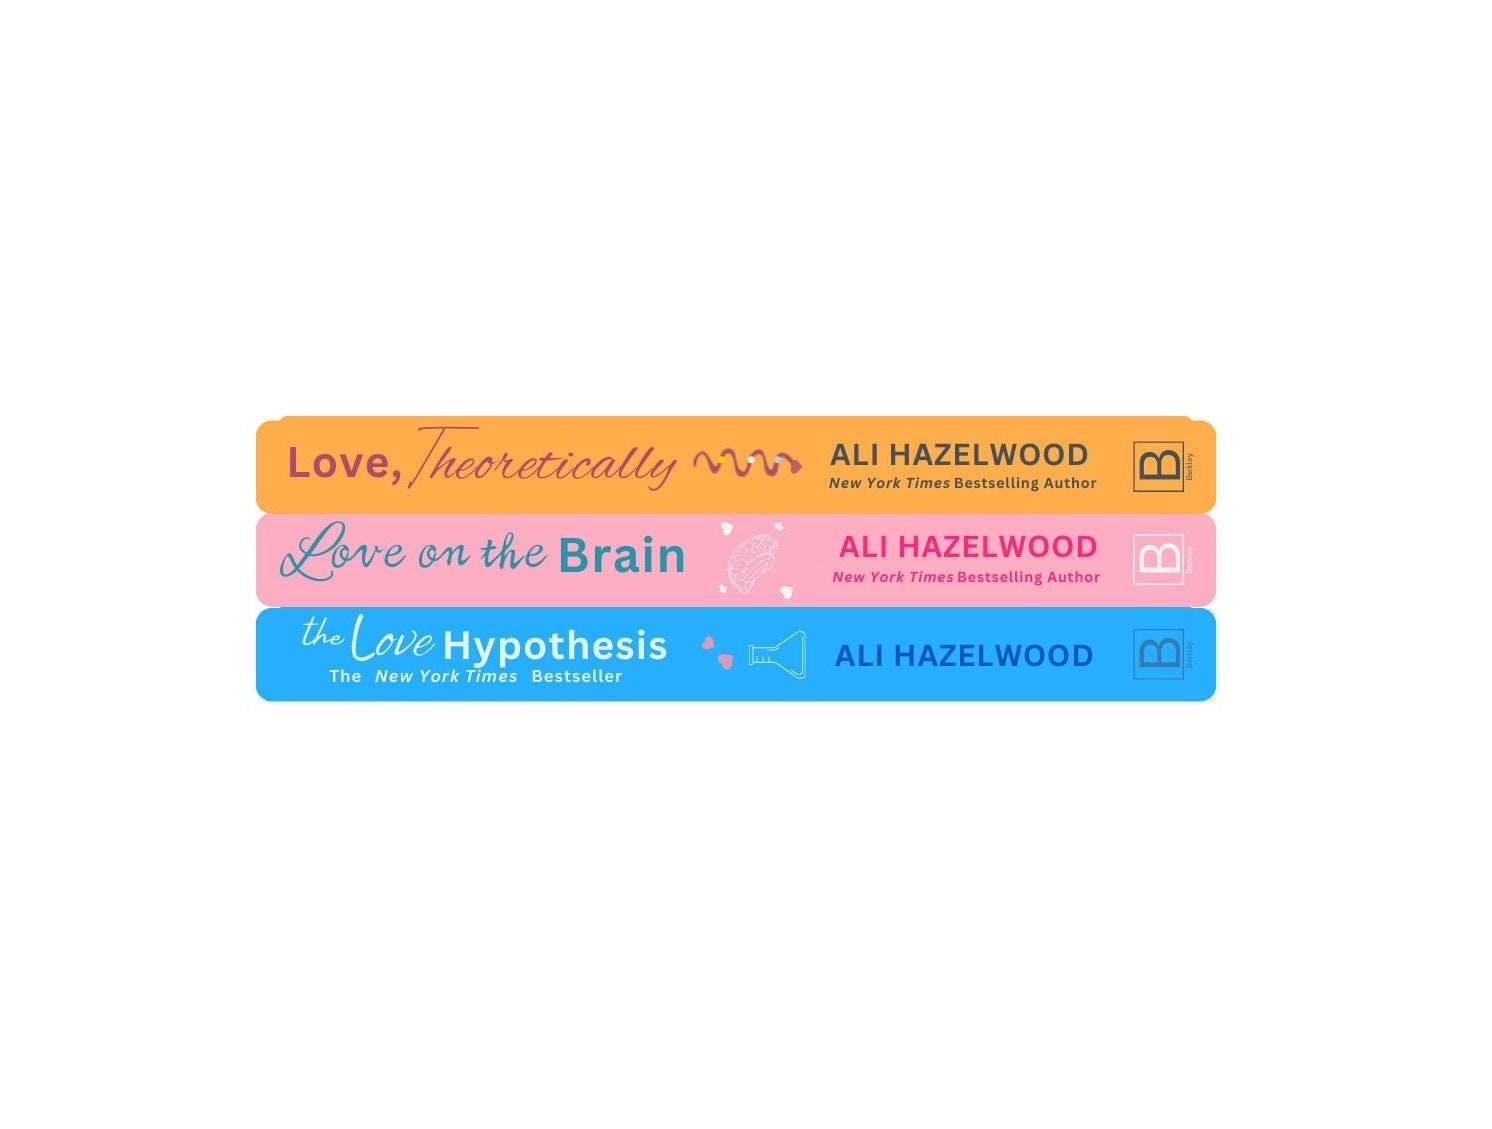 Ali Hazelwood book stack Essential T-Shirt for Sale by